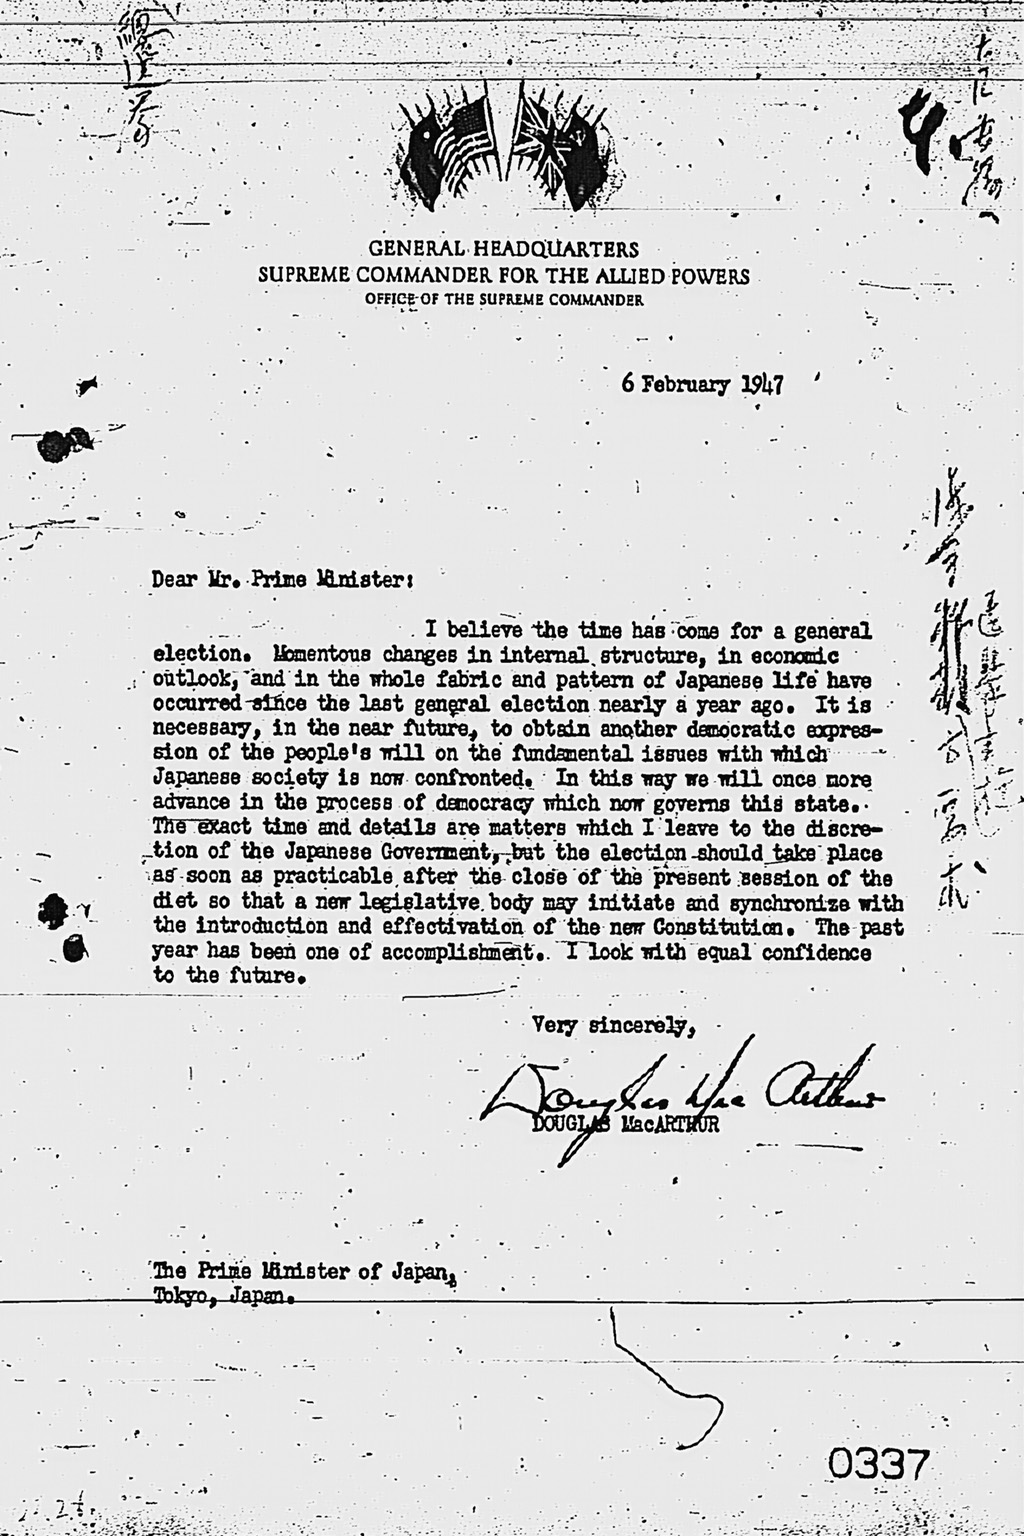 『Letter from Douglas MacArthur to Prime Minister, dated 6 February 1947』(拡大画像)